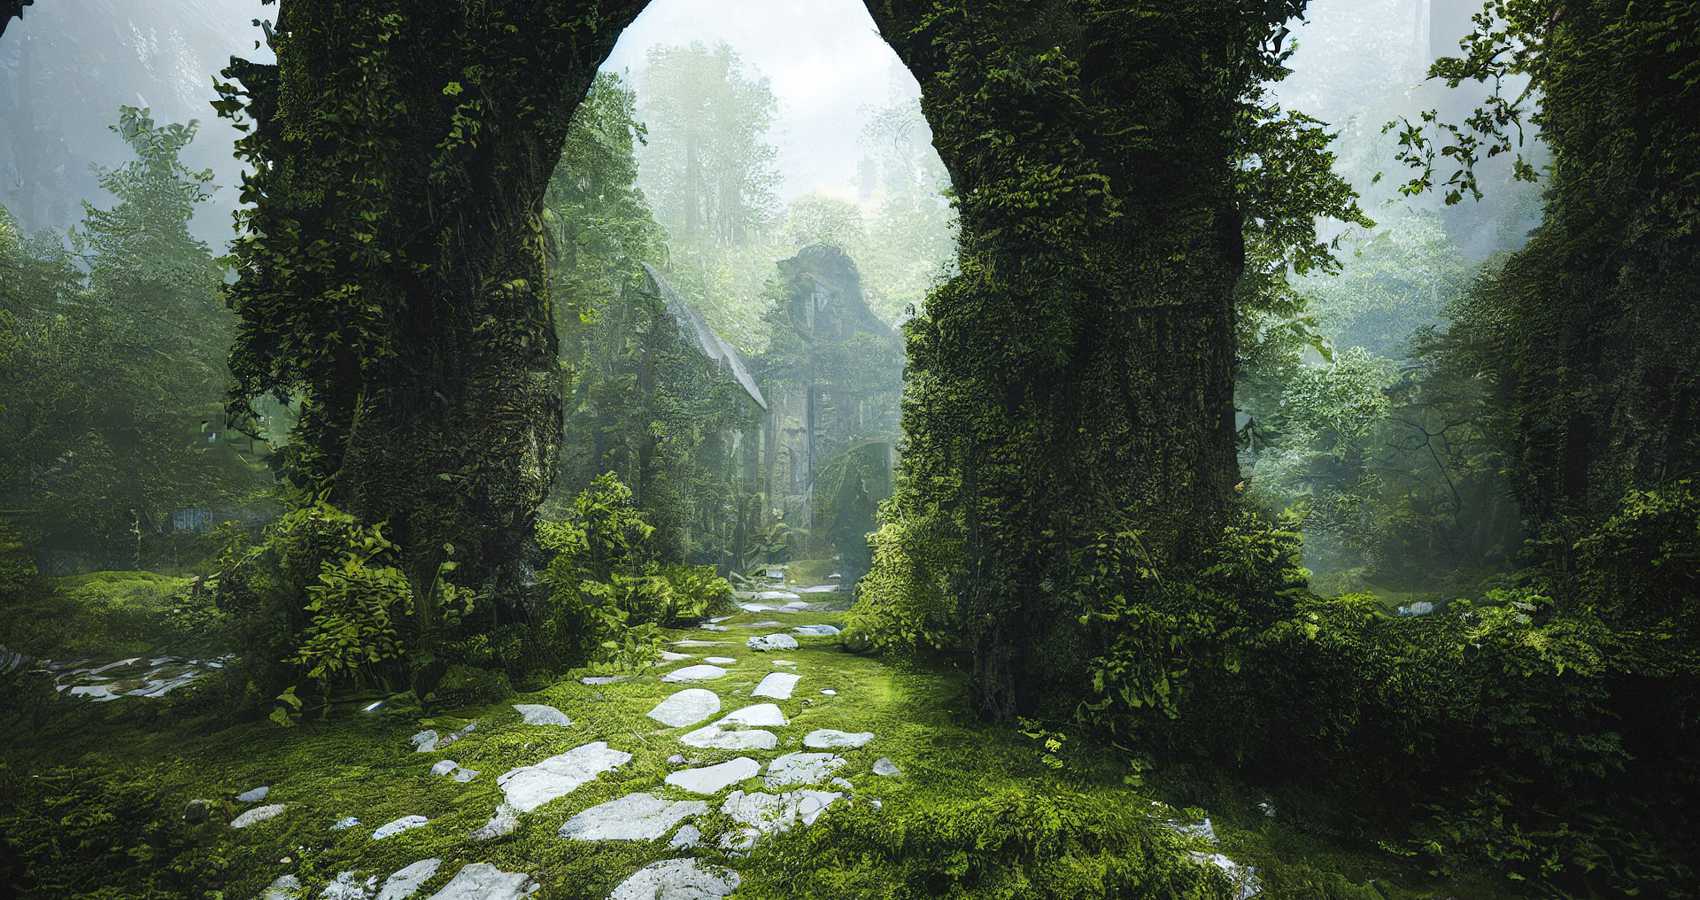 Life in The Ruins, a poem by Michael Zeller at Spillwords.com